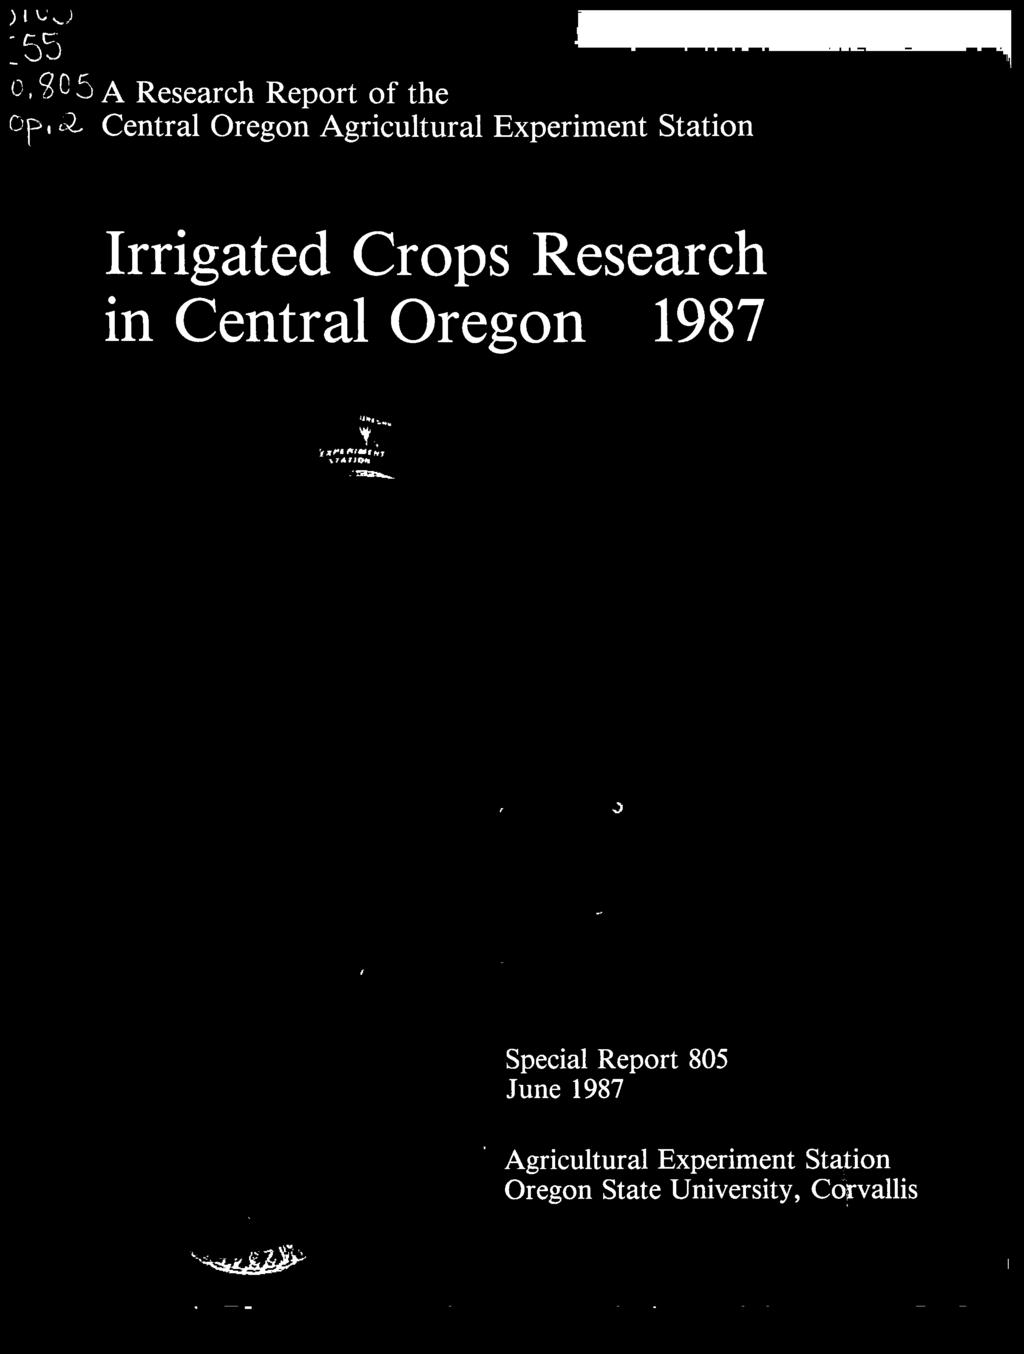 Crops Research in Central Oregon 1987 Special Report 805